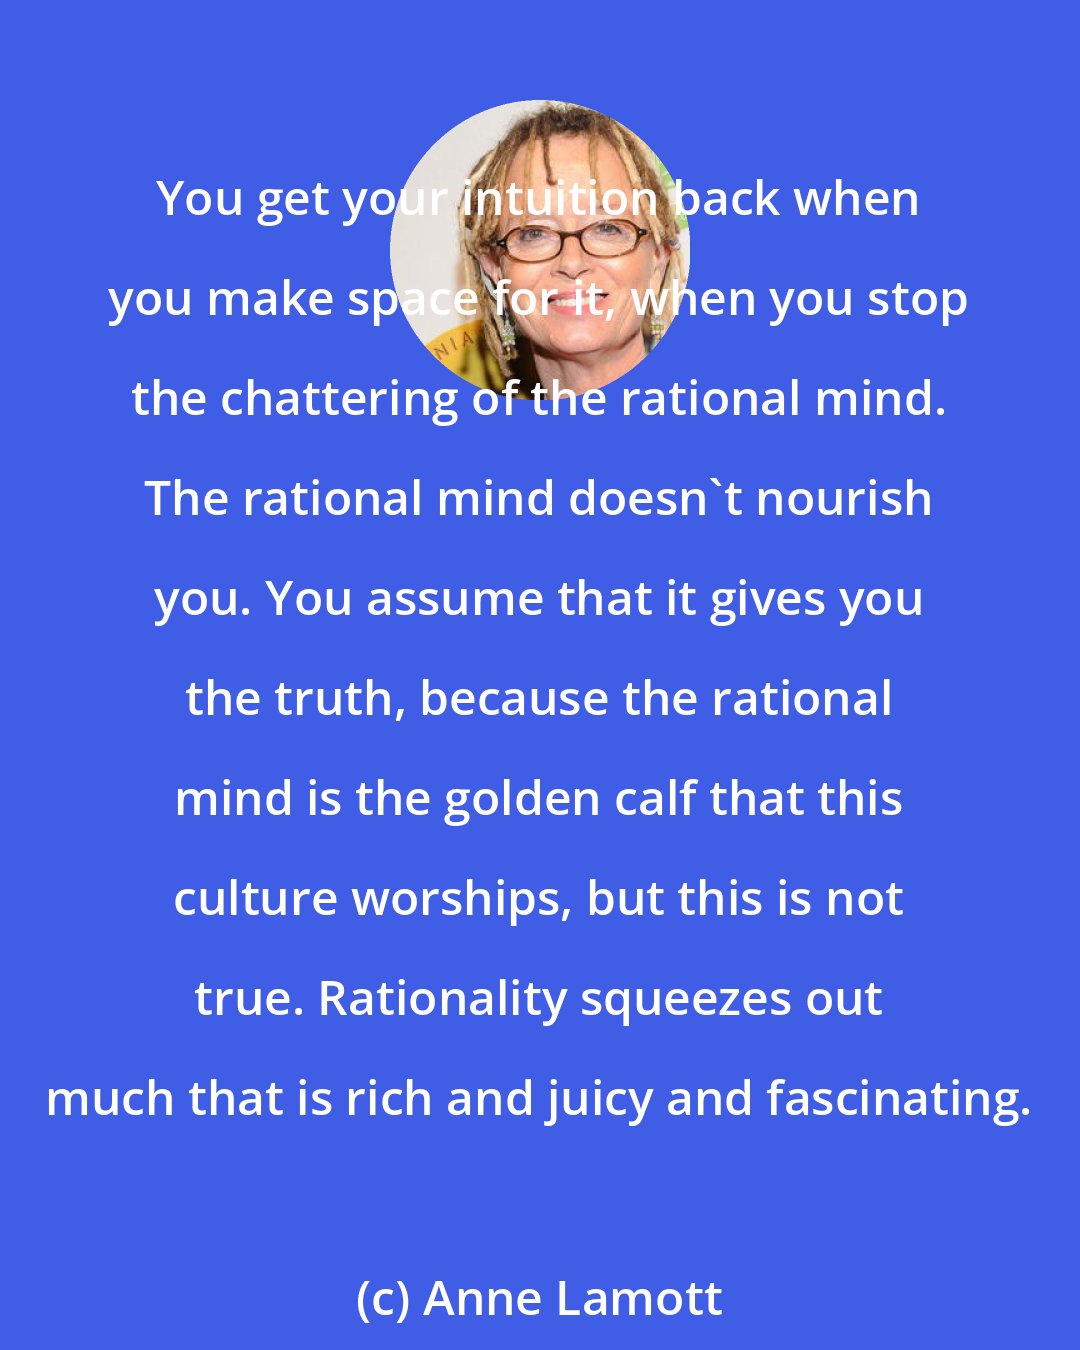 Anne Lamott: You get your intuition back when you make space for it, when you stop the chattering of the rational mind. The rational mind doesn't nourish you. You assume that it gives you the truth, because the rational mind is the golden calf that this culture worships, but this is not true. Rationality squeezes out much that is rich and juicy and fascinating.